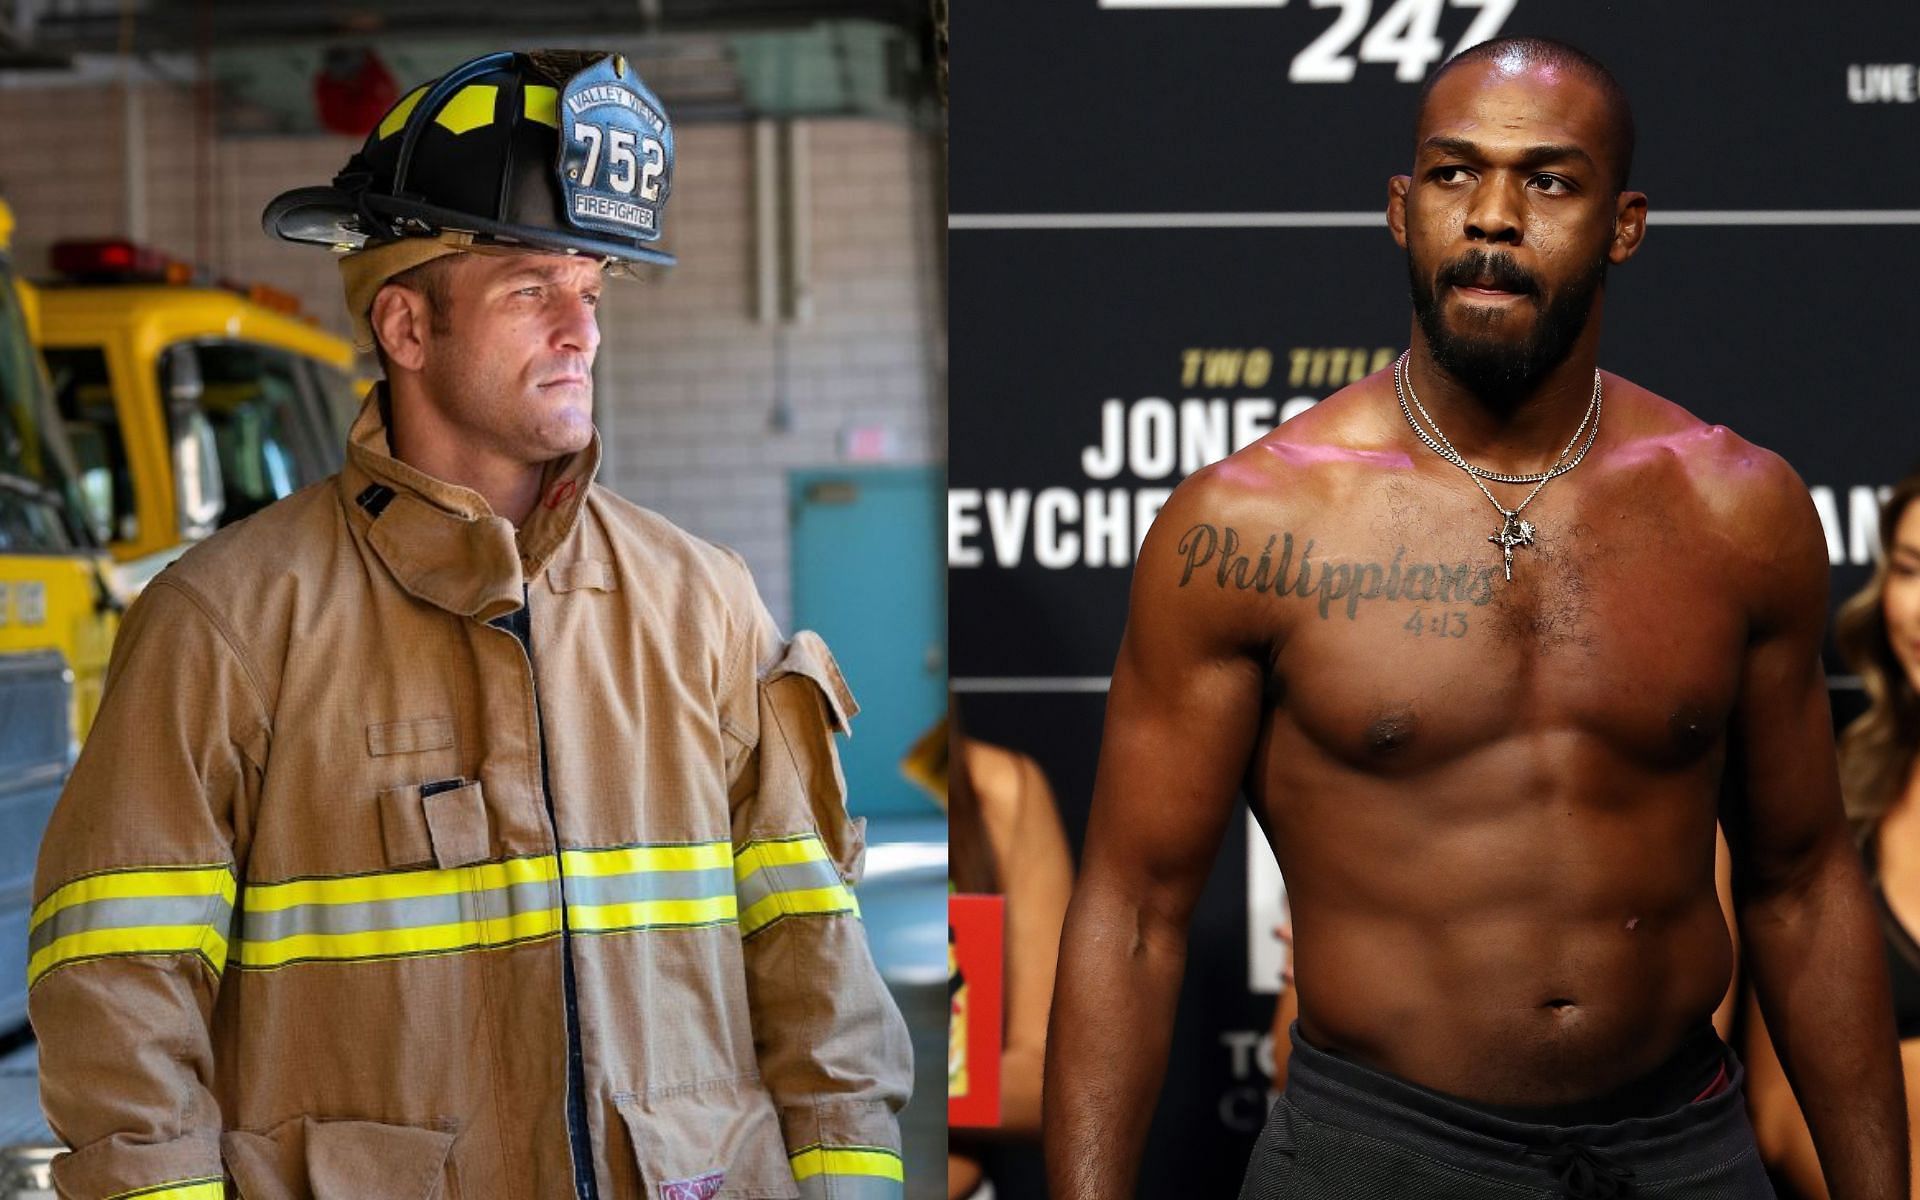 Stipe Miocic (left) and Jon Jones (right). [Images courtesy: left from ESPN and right from Getty Images]